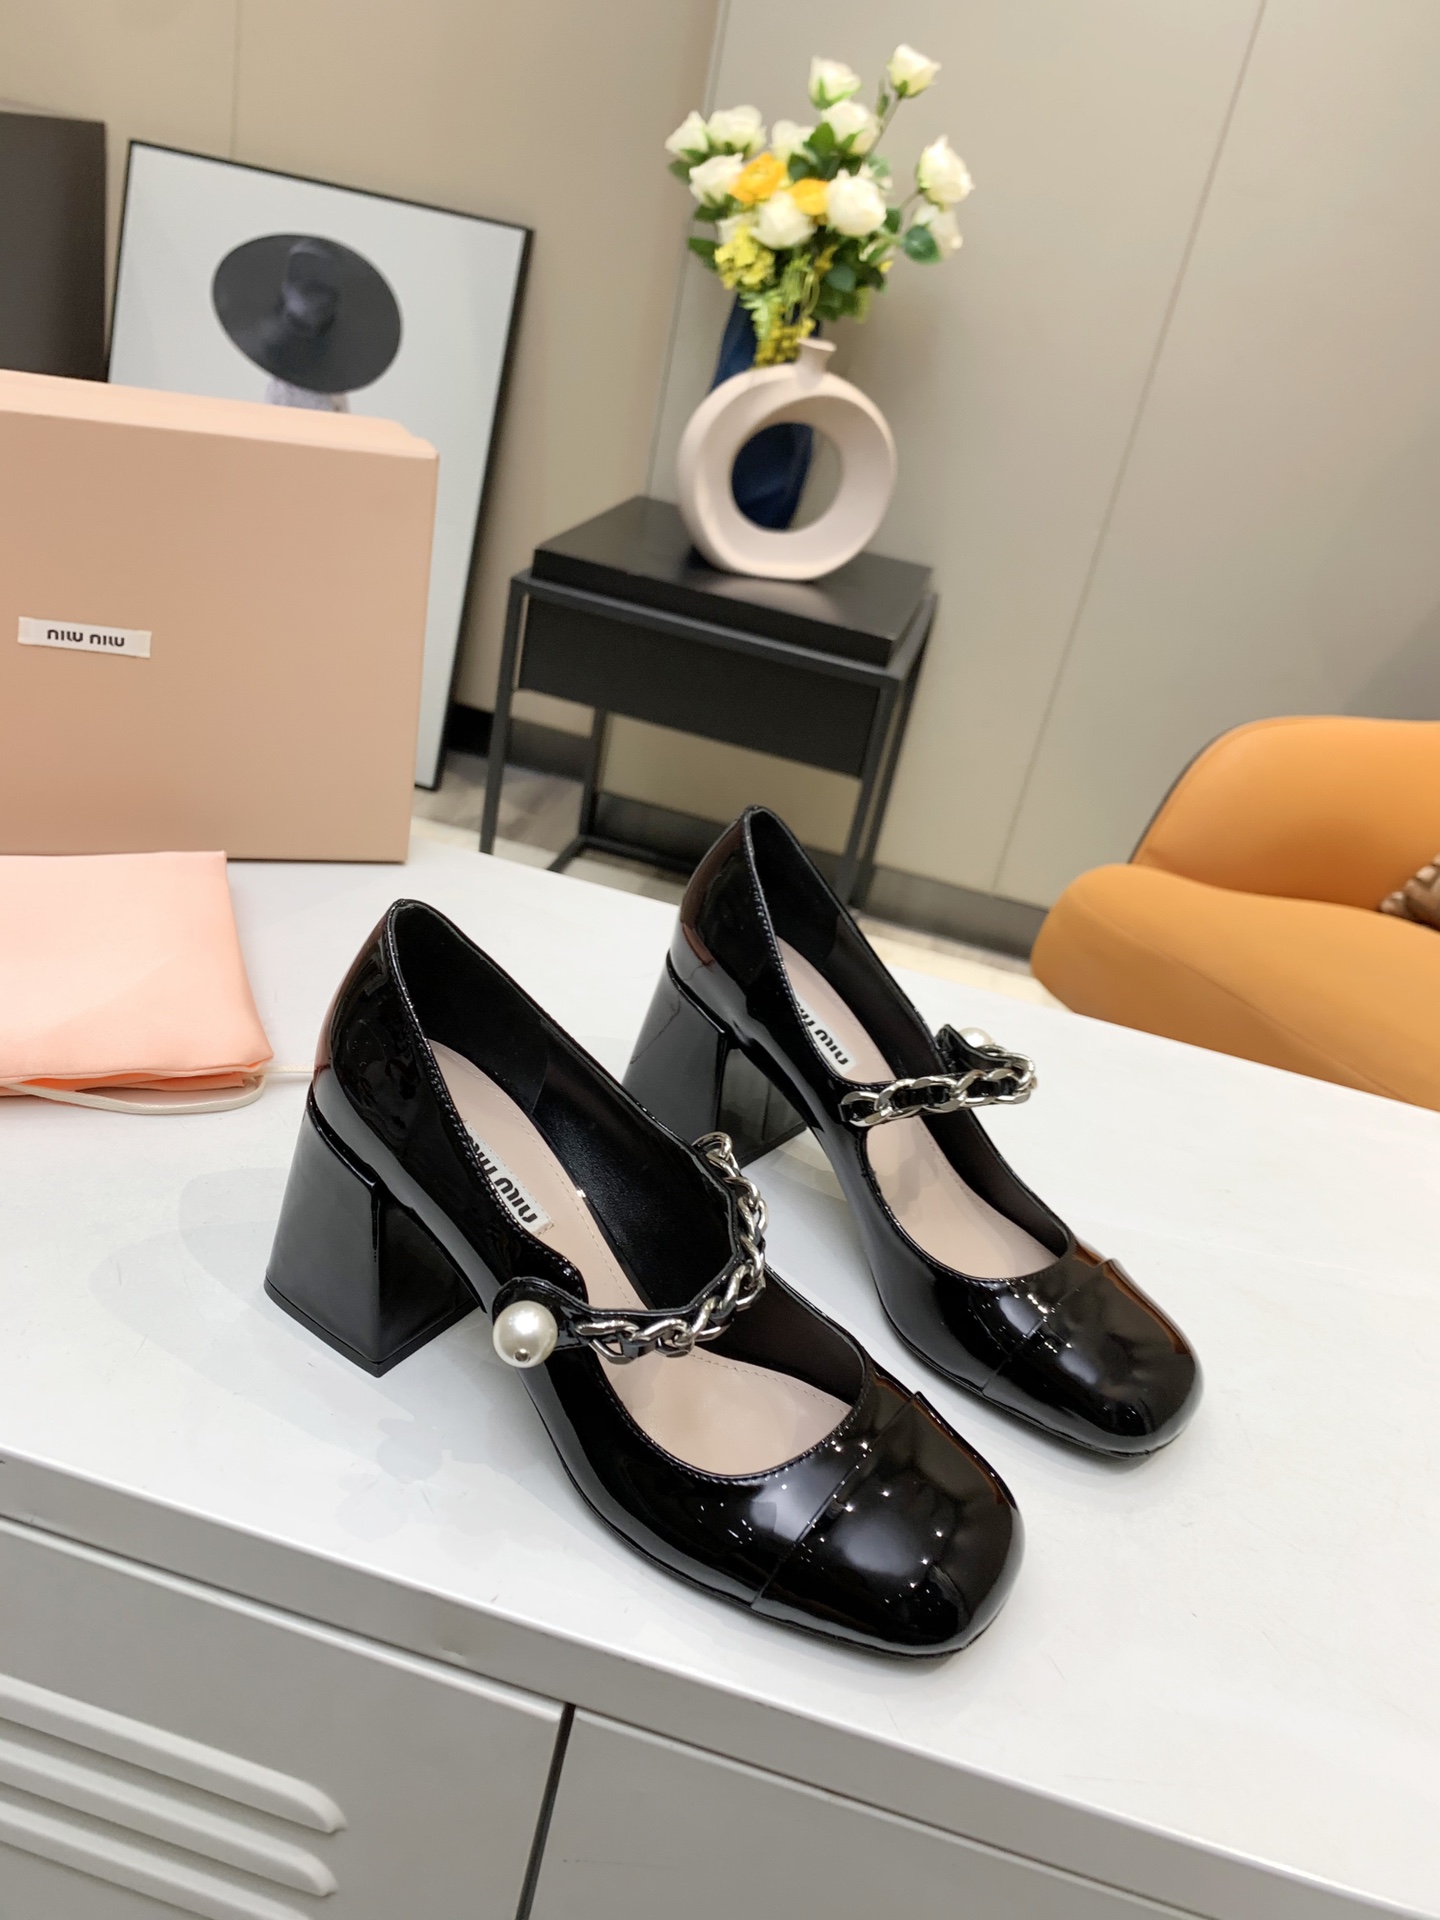 MiuMiu Single Layer Shoes Black Silver White Splicing Genuine Leather Patent Sheepskin Spring Collection Chains